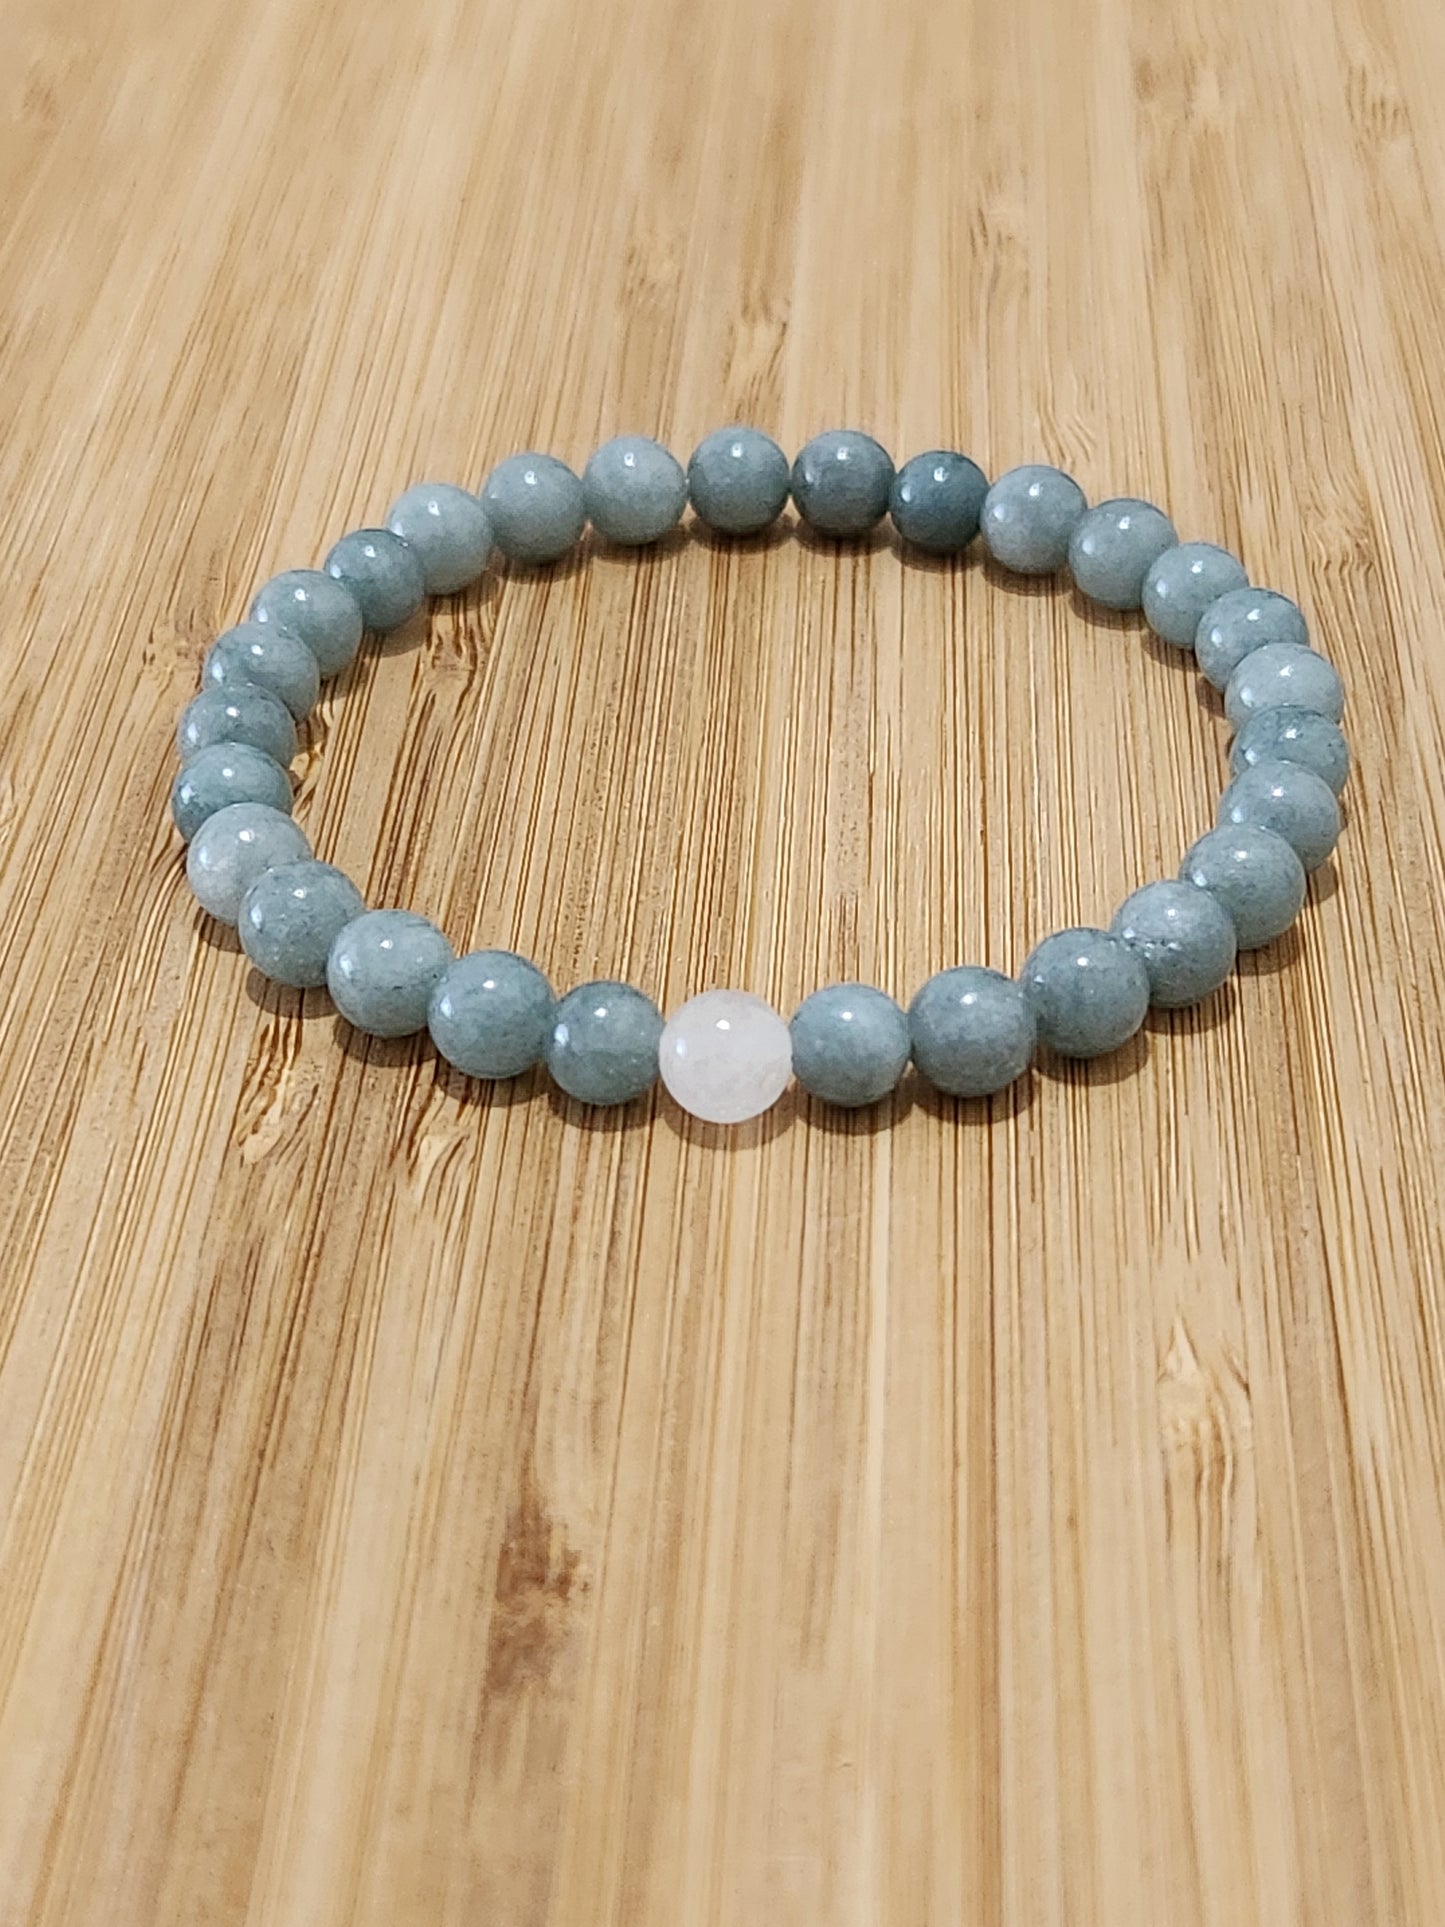 Burmese Jade Stone Bracelet with White Jade accent piece - dreaming - soothing - calming - immune system